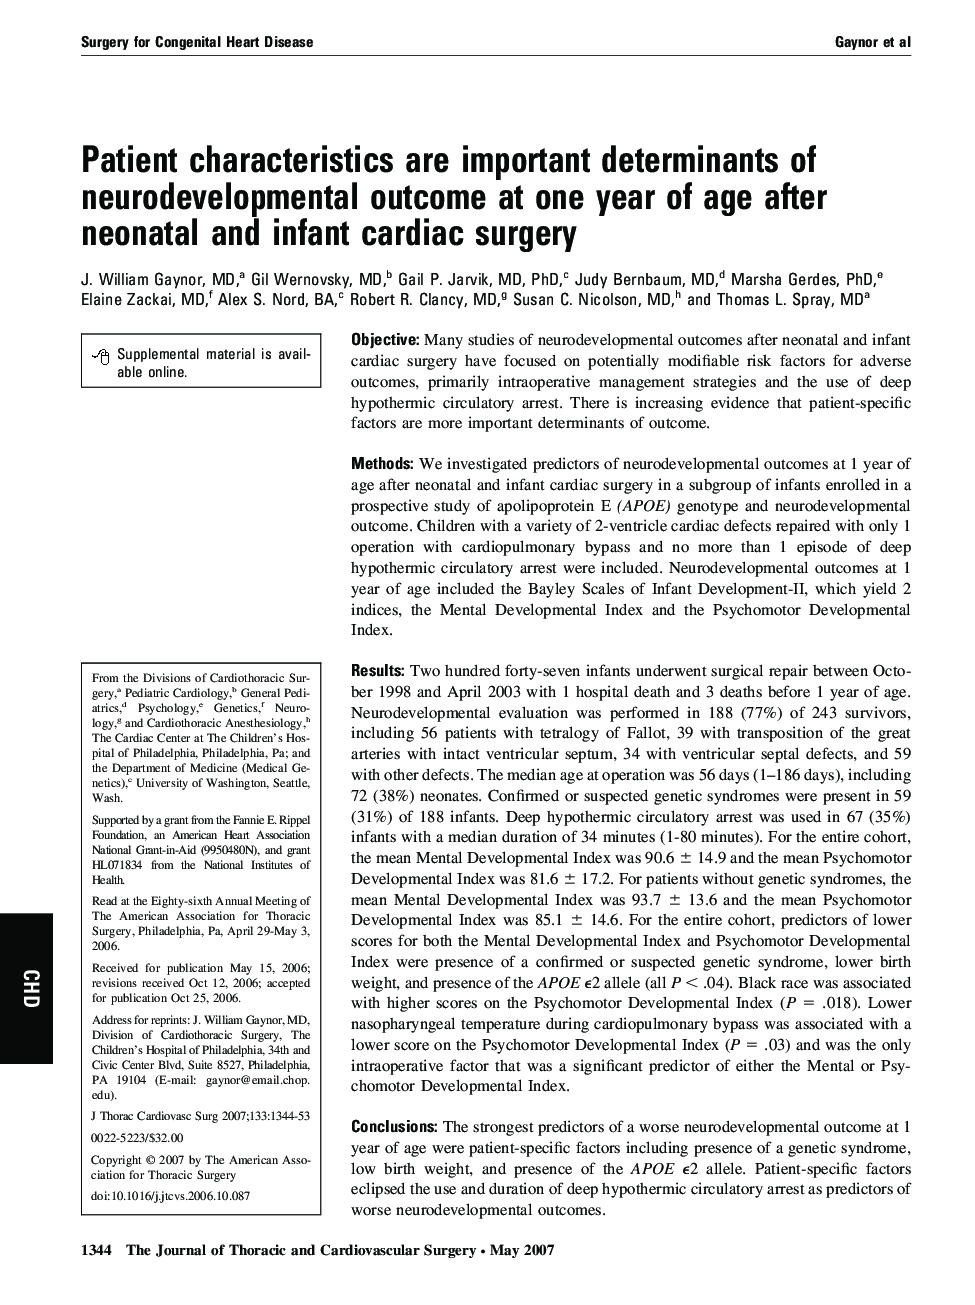 Patient characteristics are important determinants of neurodevelopmental outcome at one year of age after neonatal and infant cardiac surgery